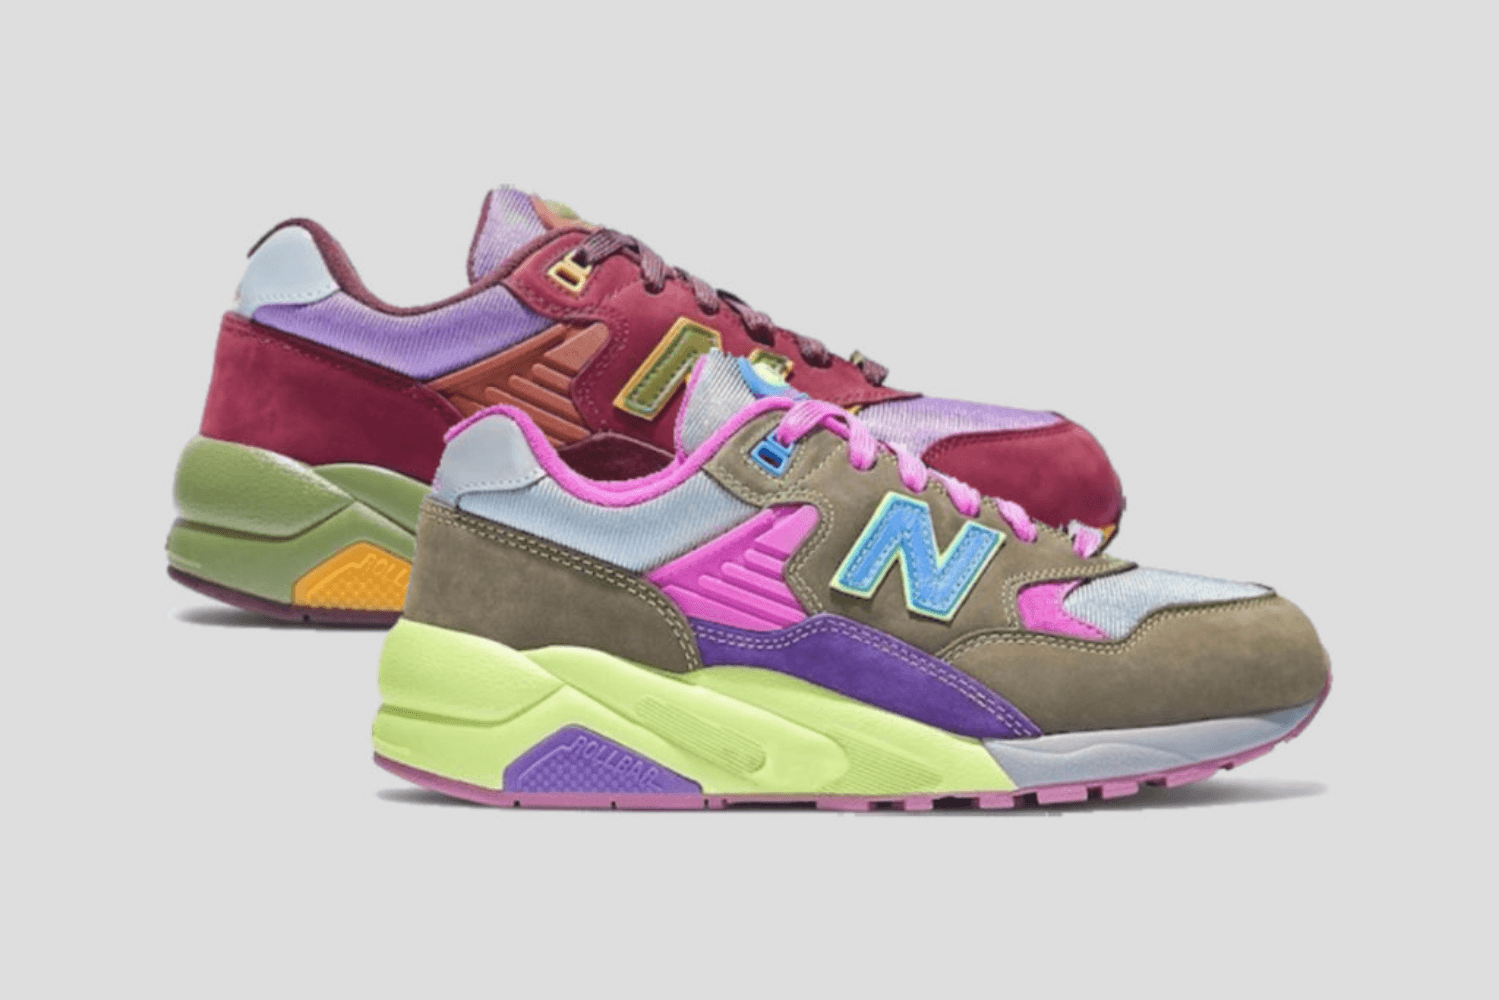 Official images of the Stray Rats x New Balance 580 pack